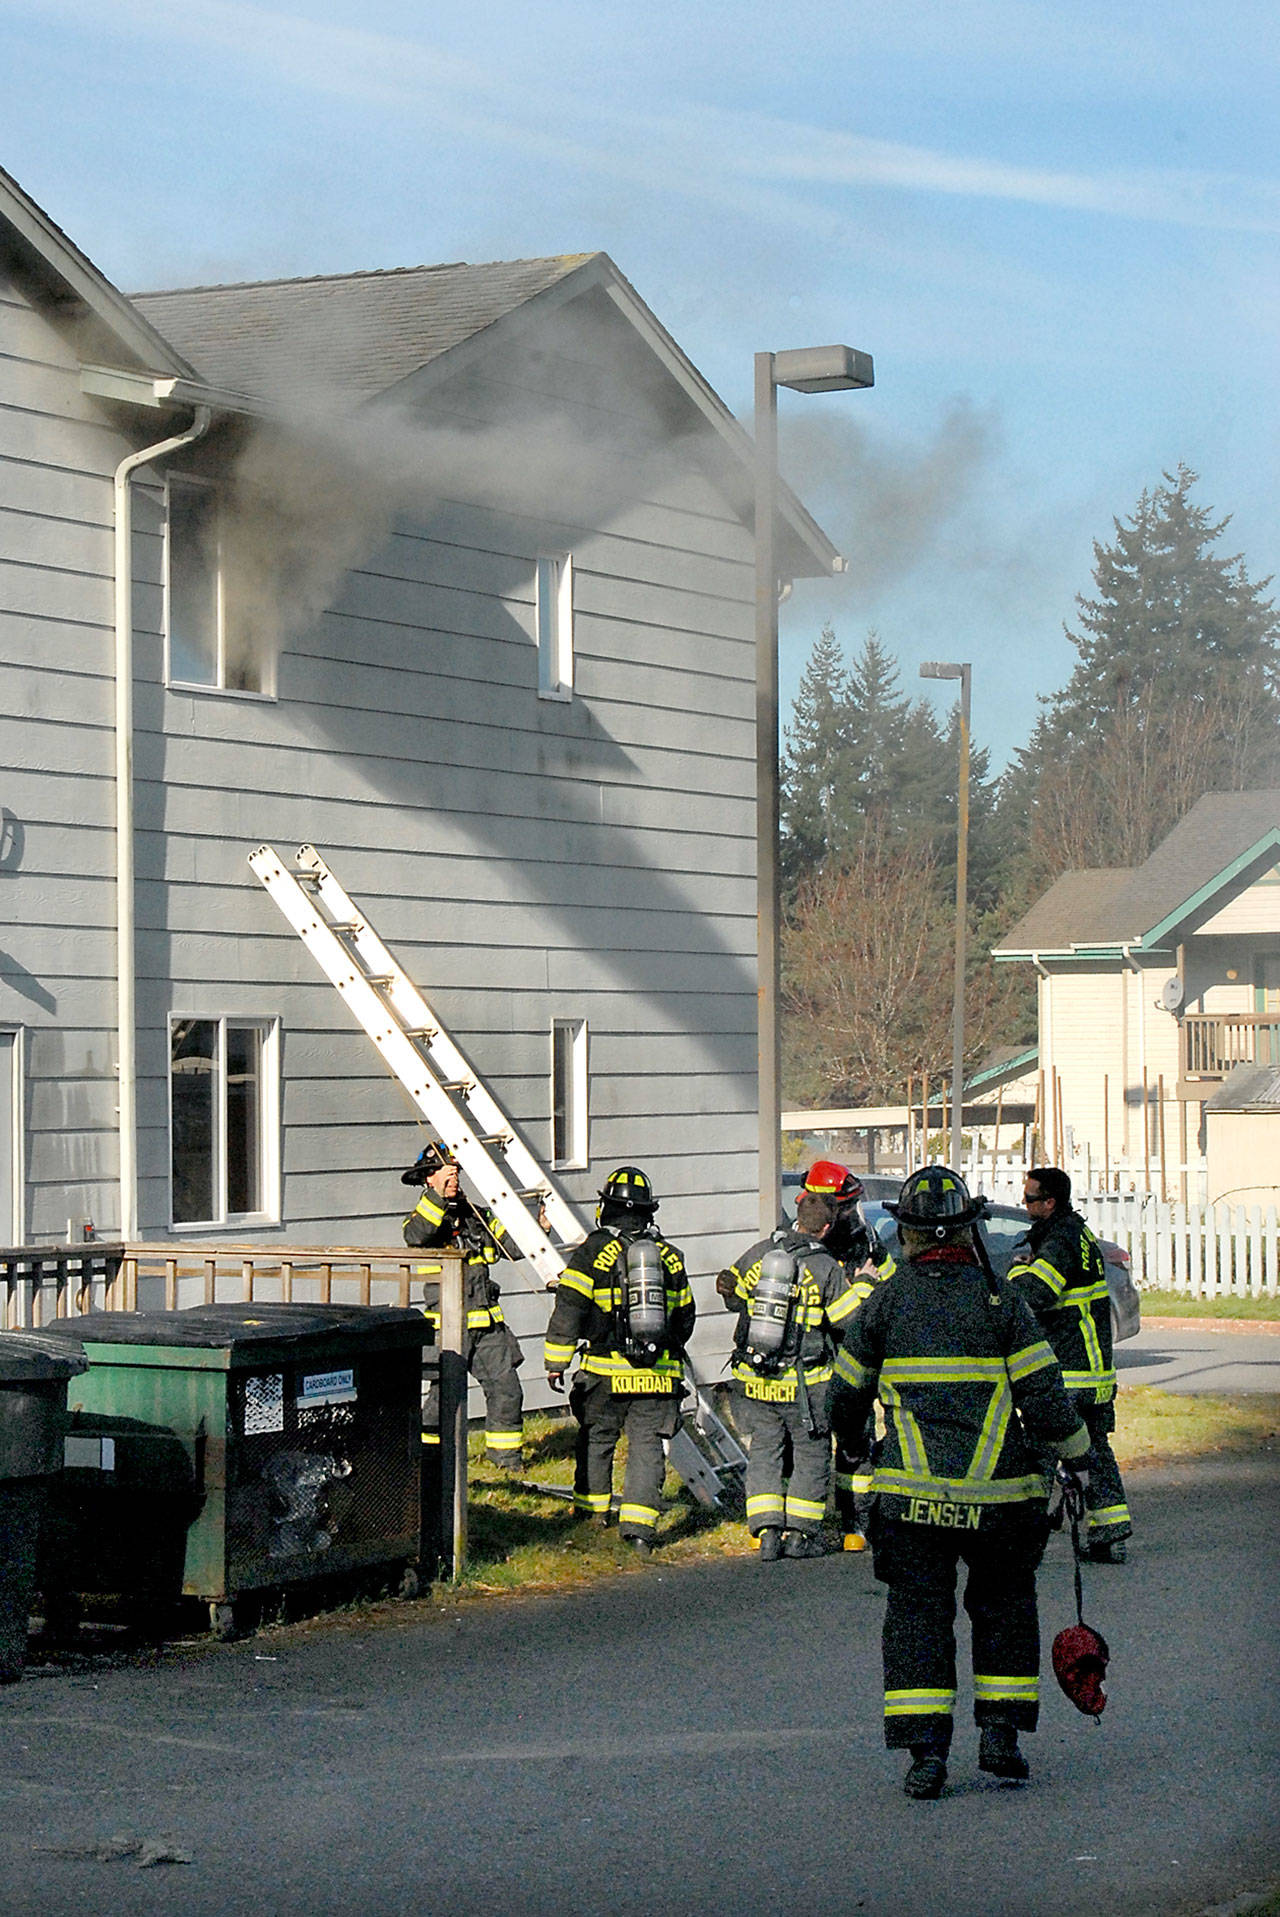 Smoke pours from the second floor window of unit D-15 at Evergreen Family Village in Port Angeles as firefighters extinguish a blaze in the building on Friday morning. (Keith Thorpe/Peninsula Daily News)